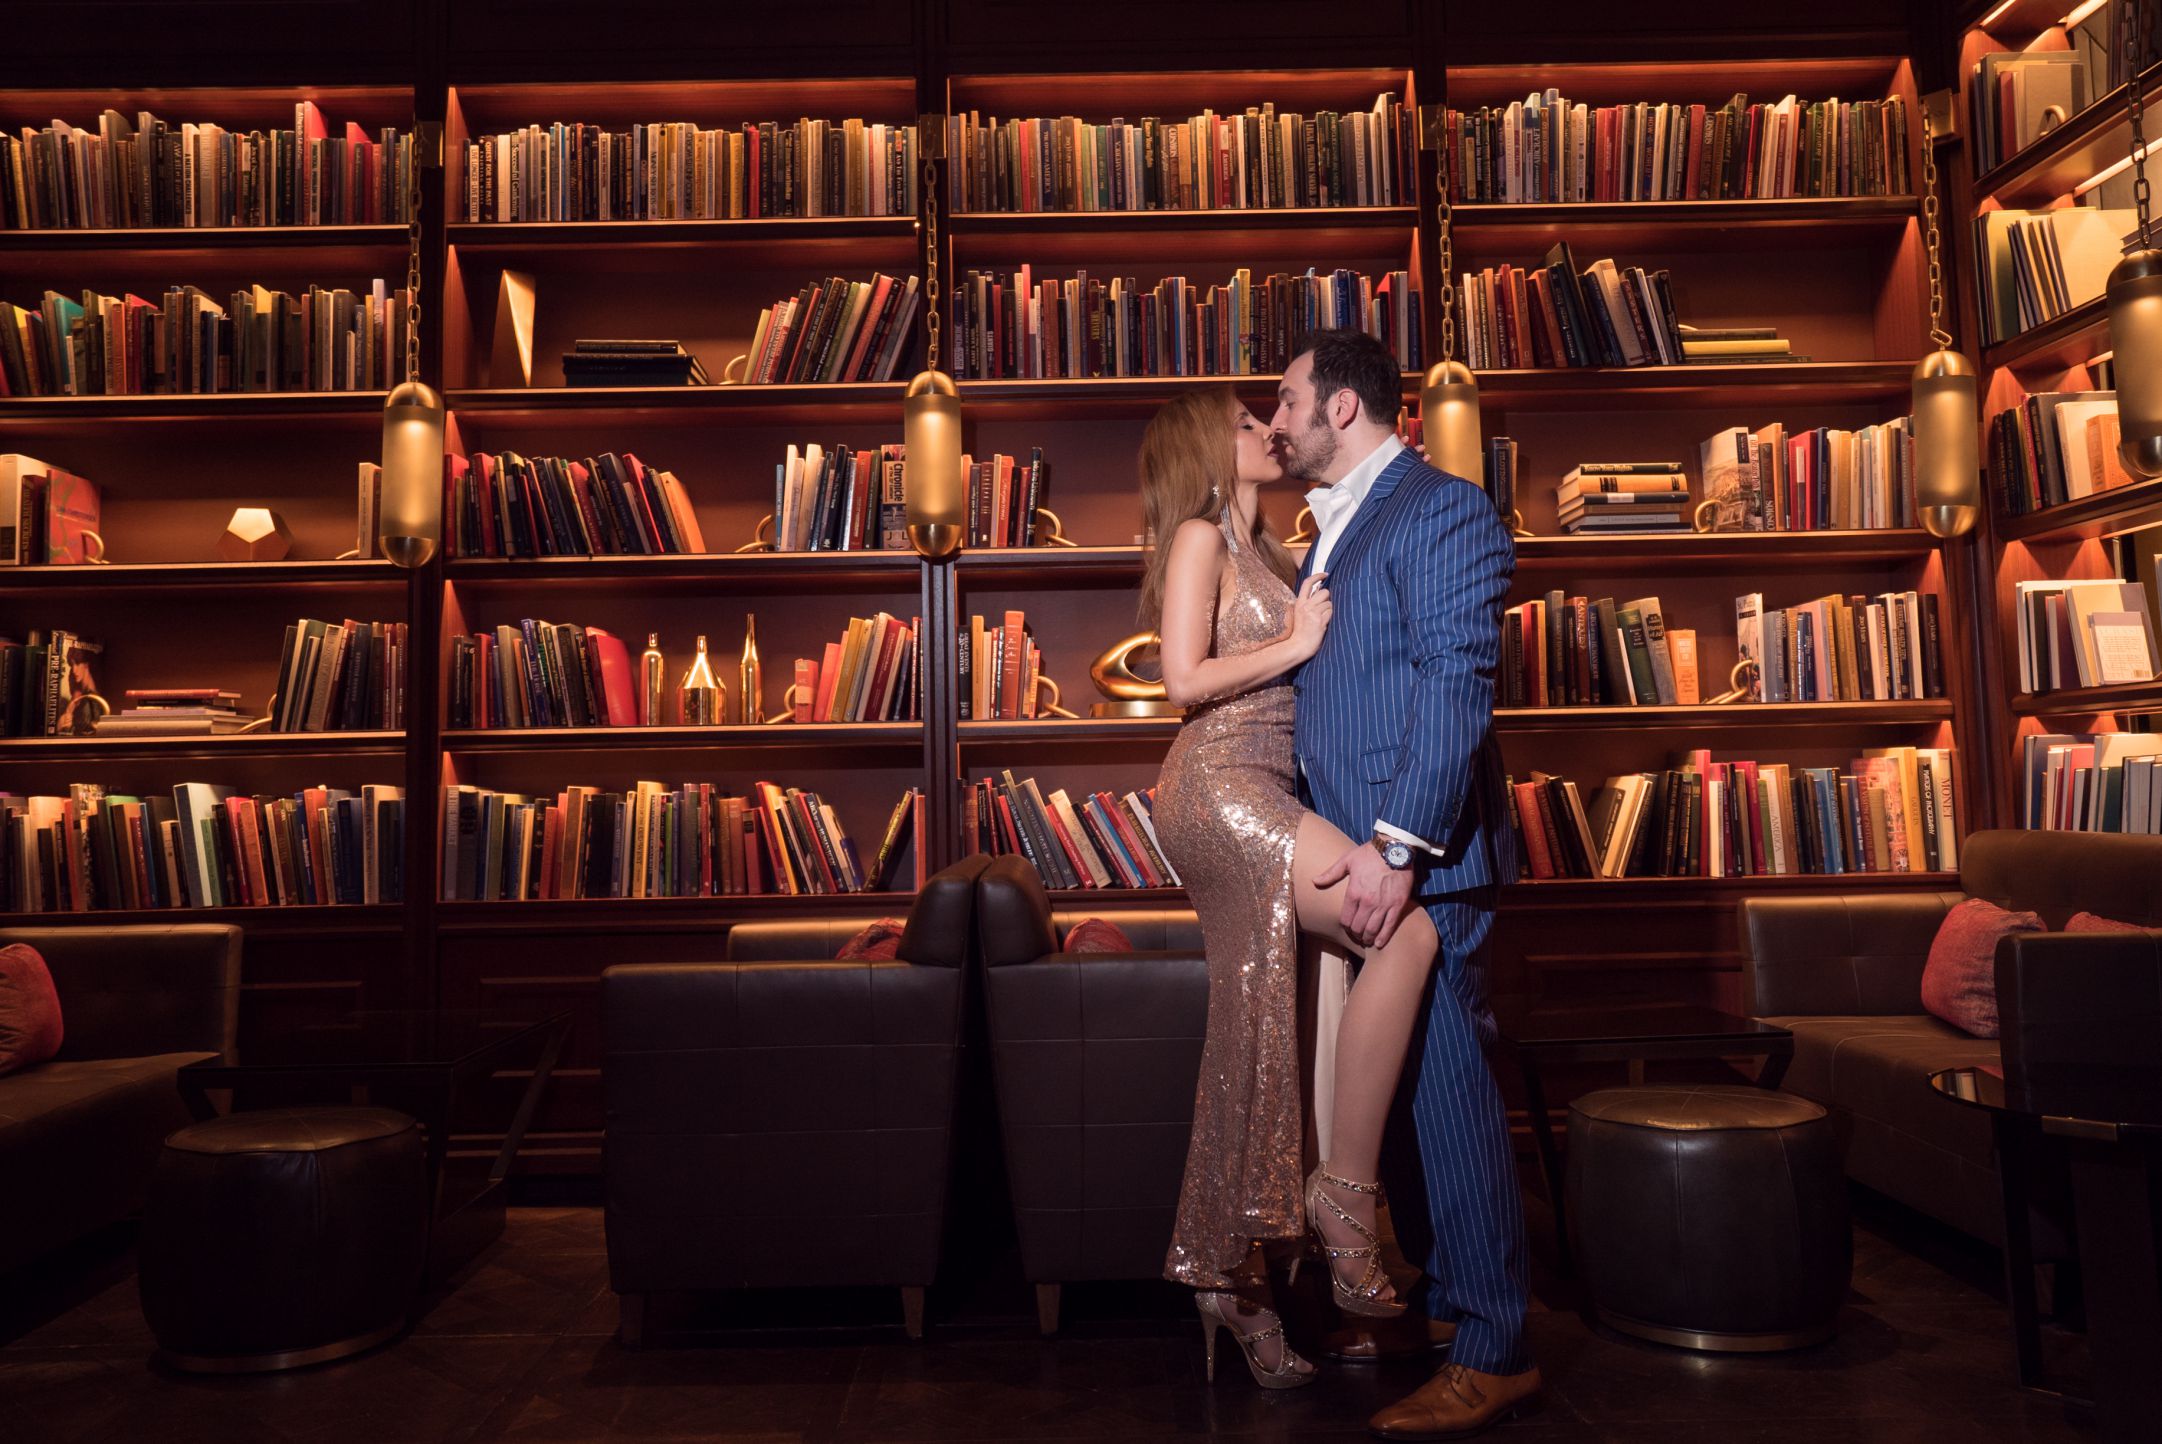 Couple photoshoot inside a library all dressed up